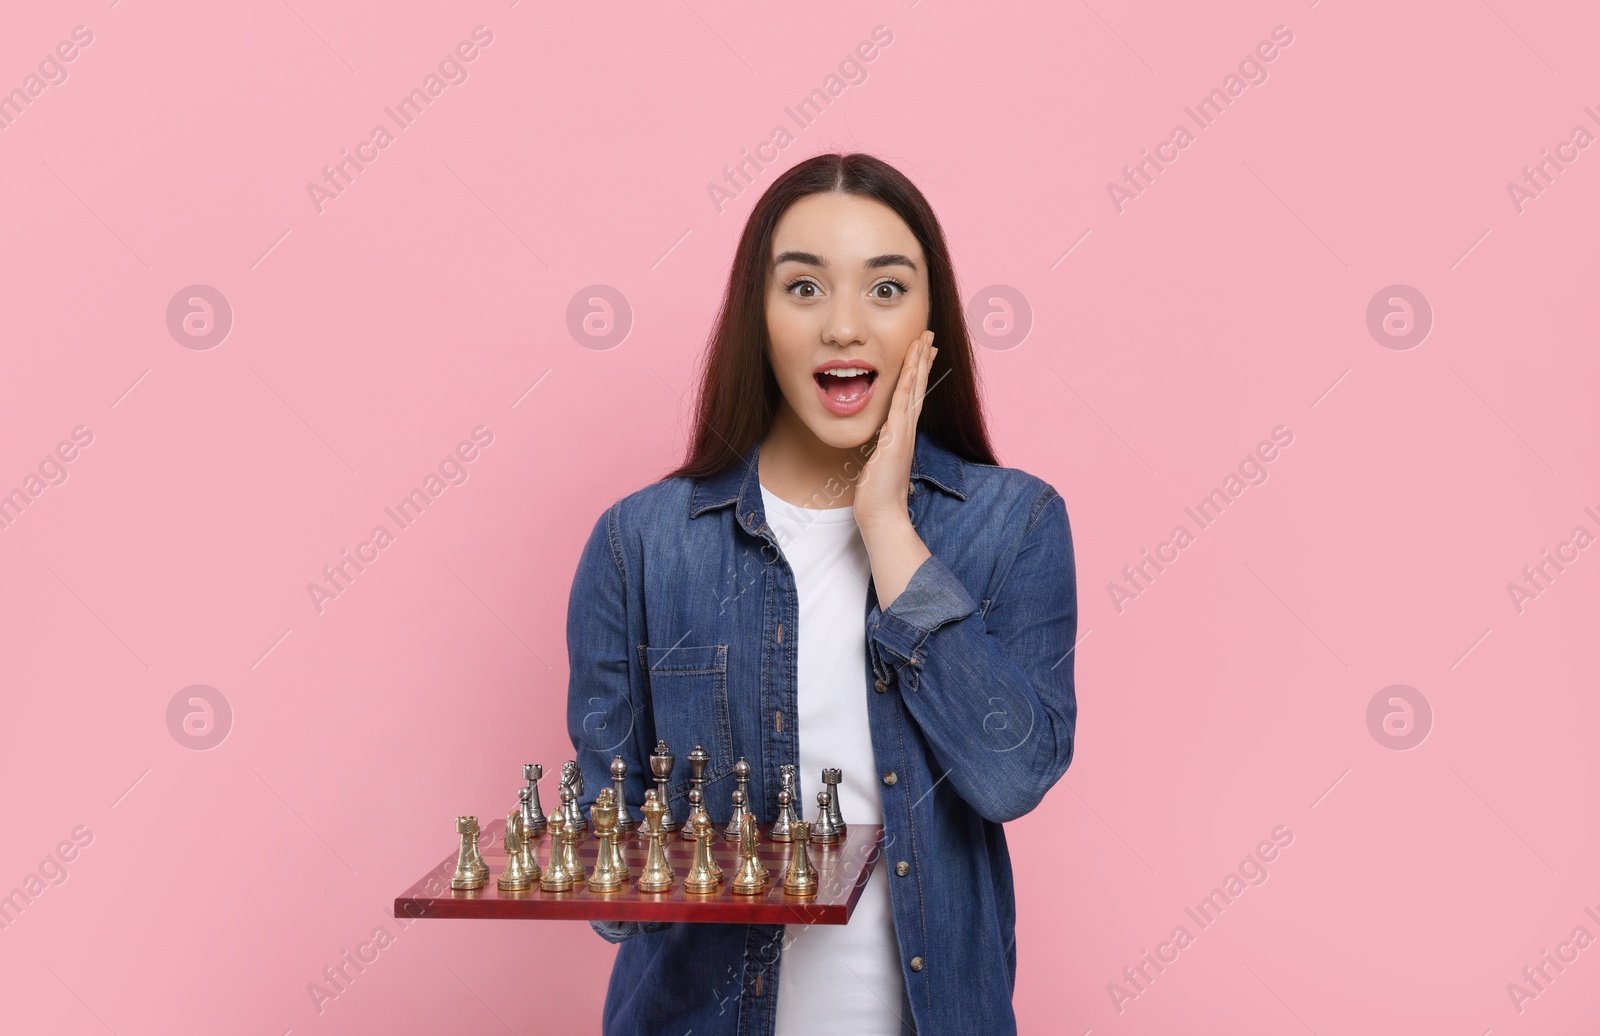 Photo of Emotional woman holding chessboard with game pieces on pink background